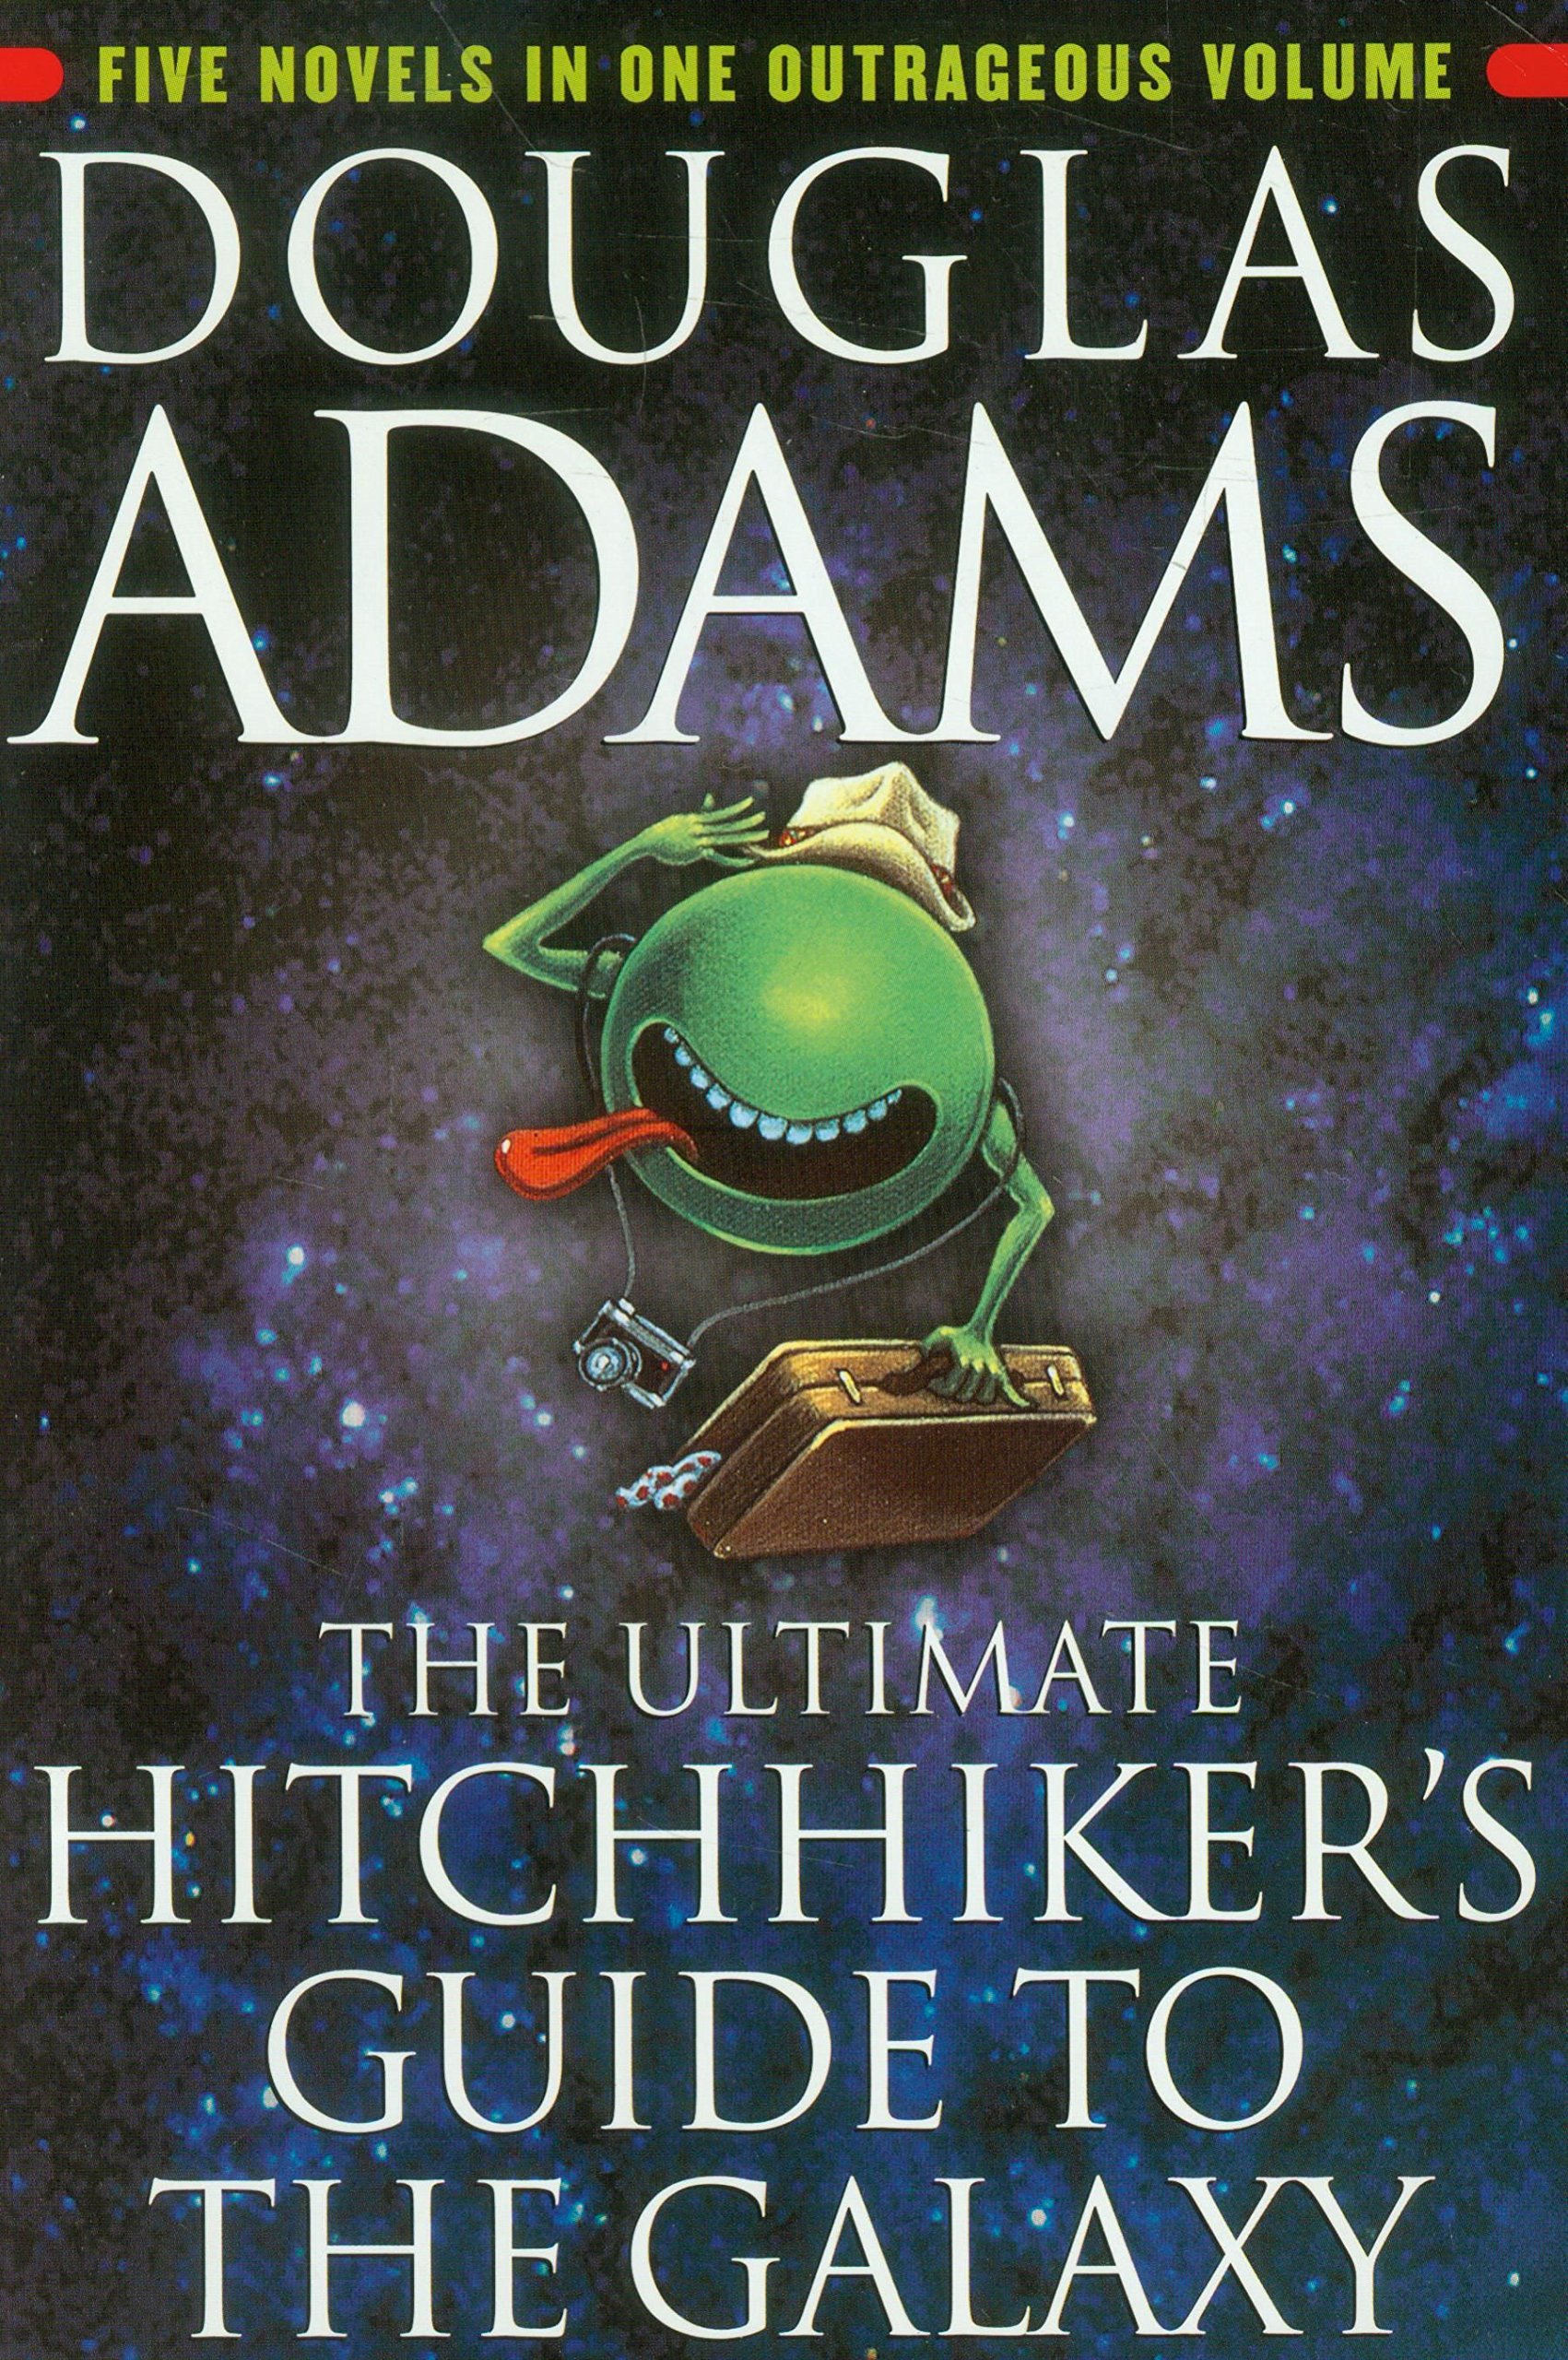 The Hitchhiker's Guide To The Galaxy #2